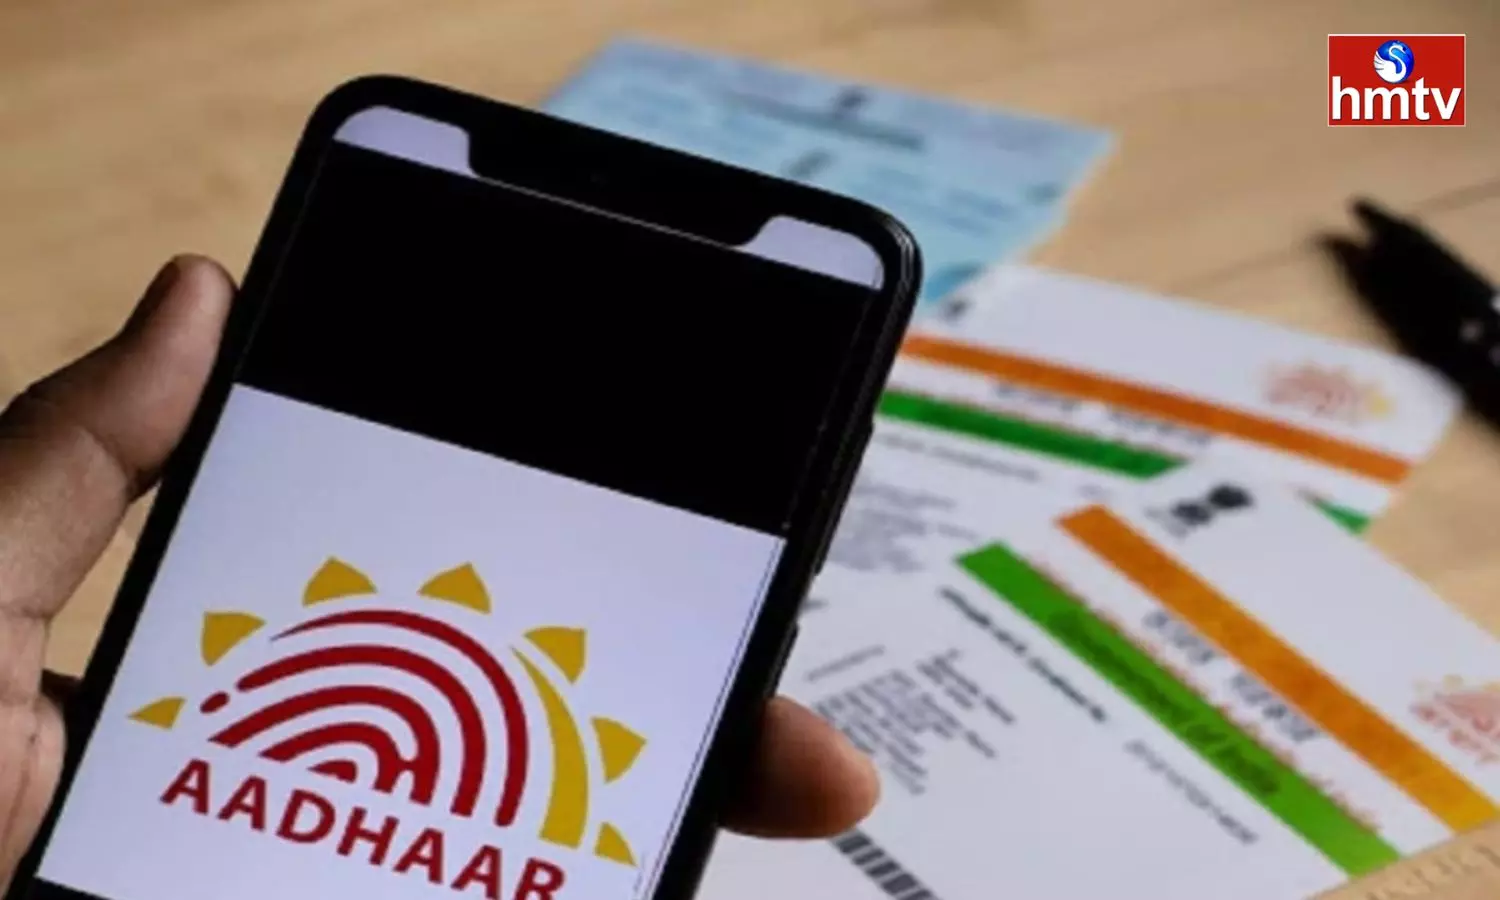 If the Aadhaar Card is Not Updated by this Date the Payment will be Made Later